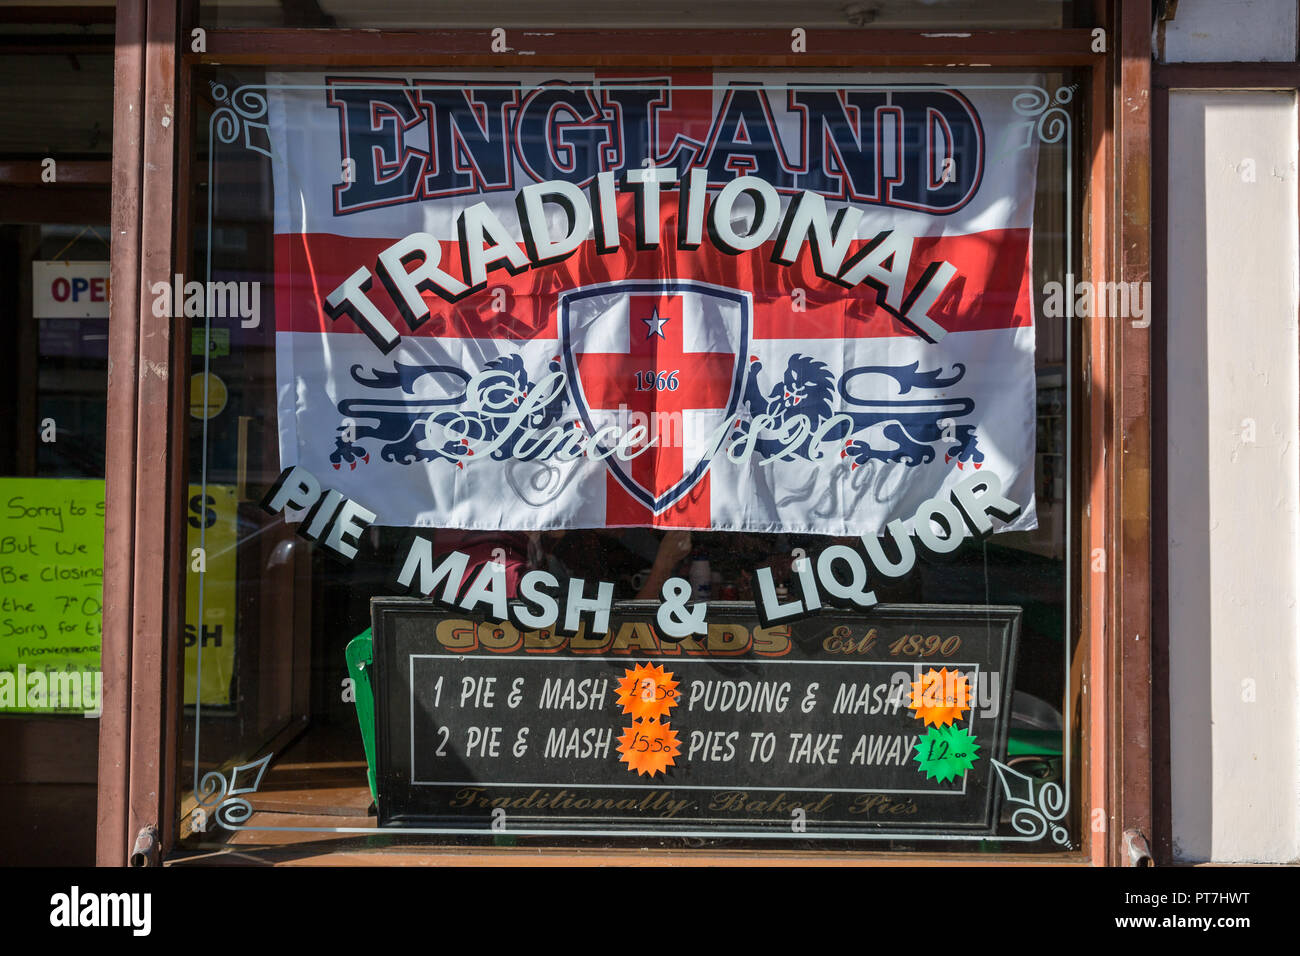 London, UK. 7th October 2018. Final trading day of A.J. Goddard traditional Pie & Mash café in Deptford. Credit: Guy Corbishley/Alamy Live News Stock Photo